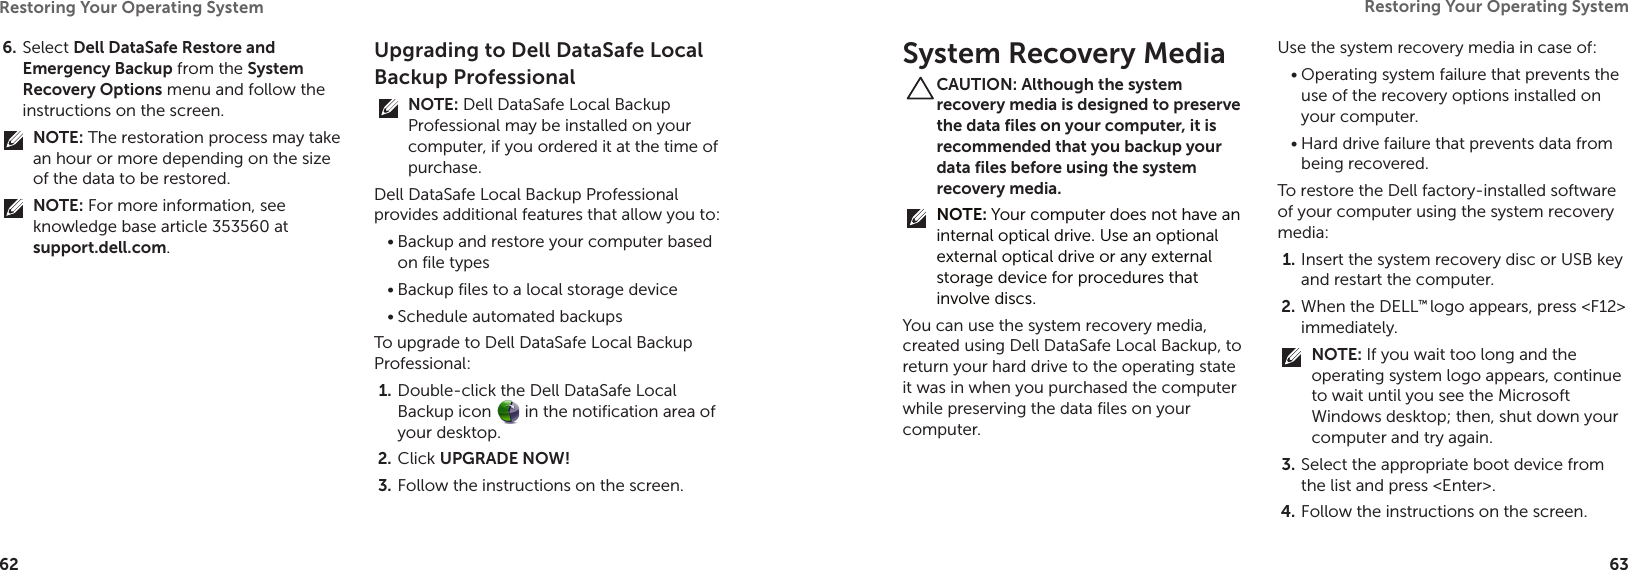 62Restoring Your Operating System  63Restoring Your Operating System  Select 6.  Dell DataSafe Restore and Emergency Backup from the System Recovery Options menu and follow the instructions on the screen.NOTE: The restoration process may take an hour or more depending on the size of the data to be restored.NOTE: For more information, see knowledge base article 353560 at support.dell.com.Upgrading to Dell DataSafe Local Backup ProfessionalNOTE: Dell DataSafe Local Backup Professional may be installed on your computer, if you ordered it at the time of purchase.Dell DataSafe Local Backup Professional provides additional features that allow you to:Backup and restore your computer based •on file typesBackup files to a local storage device•Schedule automated backups•To upgrade to Dell DataSafe Local Backup Professional:Double-click the Dell DataSafe Local 1. Backup icon   in the notification area of your desktop.Click 2.  UPGRADE NOW!Follow the instructions on the screen.3. System Recovery MediaCAUTION: Although the system recovery media is designed to preserve the data files on your computer, it is recommended that you backup your data files before using the system recovery media.NOTE: Your computer does not have an internal optical drive. Use an optional external optical drive or any external storage device for procedures that involve discs.You can use the system recovery media, created using Dell DataSafe Local Backup, to return your hard drive to the operating state it was in when you purchased the computer while preserving the data files on your computer.Use the system recovery media in case of:Operating system failure that prevents the •use of the recovery options installed on your computer.Hard drive failure that prevents data from •being recovered.To restore the Dell factory-installed software of your computer using the system recovery media:Insert the system recovery disc or USB key 1. and restart the computer.When the DELL2.  ™ logo appears, press &lt;F12&gt; immediately.NOTE: If you wait too long and the operating system logo appears, continue to wait until you see the Microsoft Windows desktop; then, shut down your computer and try again.Select the appropriate boot device from 3. the list and press &lt;Enter&gt;.Follow the instructions on the screen.4. 